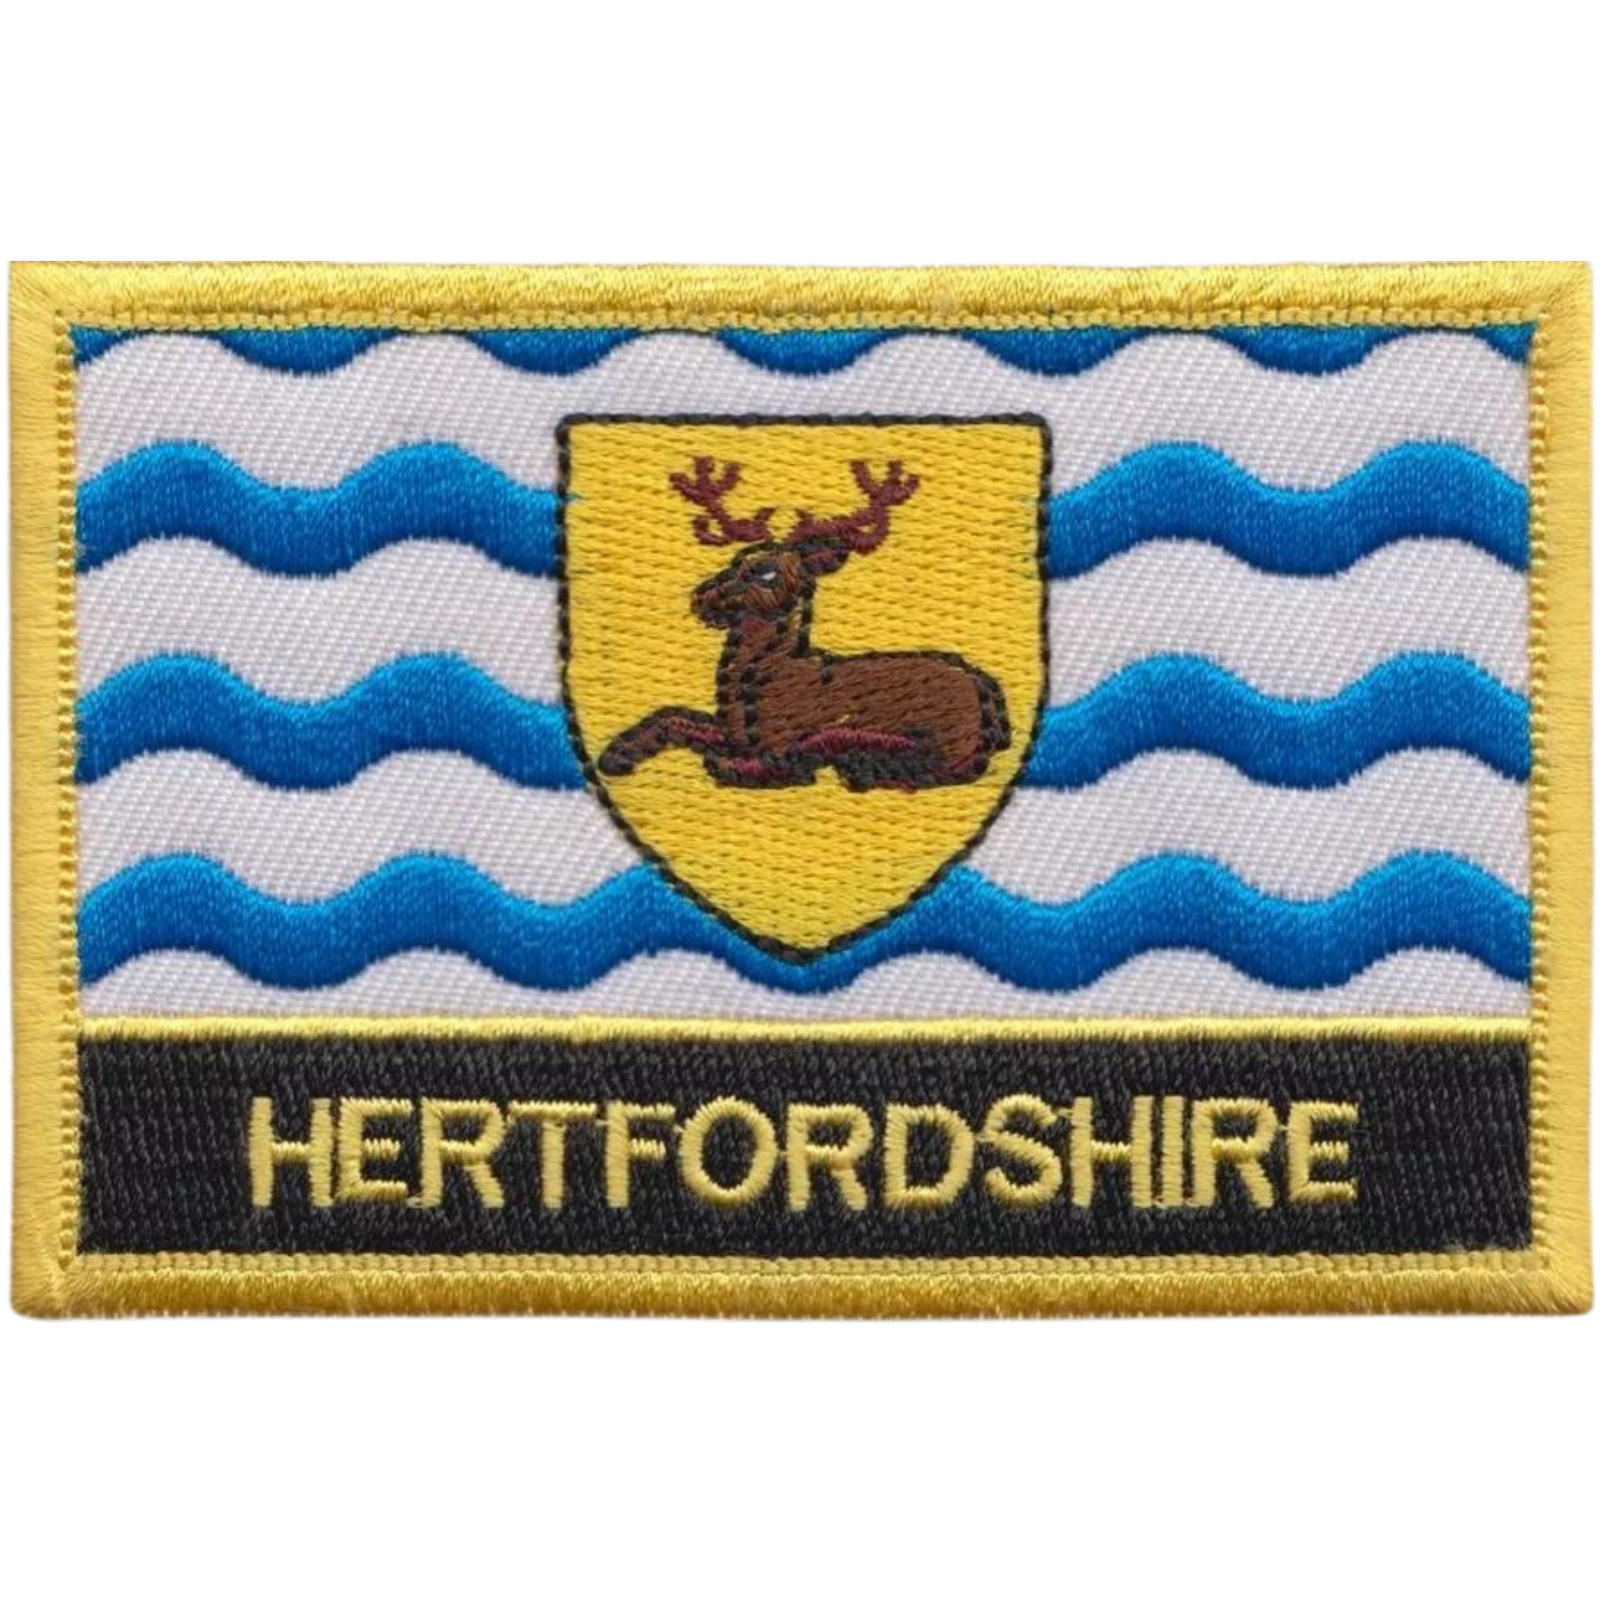 Hertfordshire Uk County Flag Iron On Patch Embroidered Sew On Applique Badge